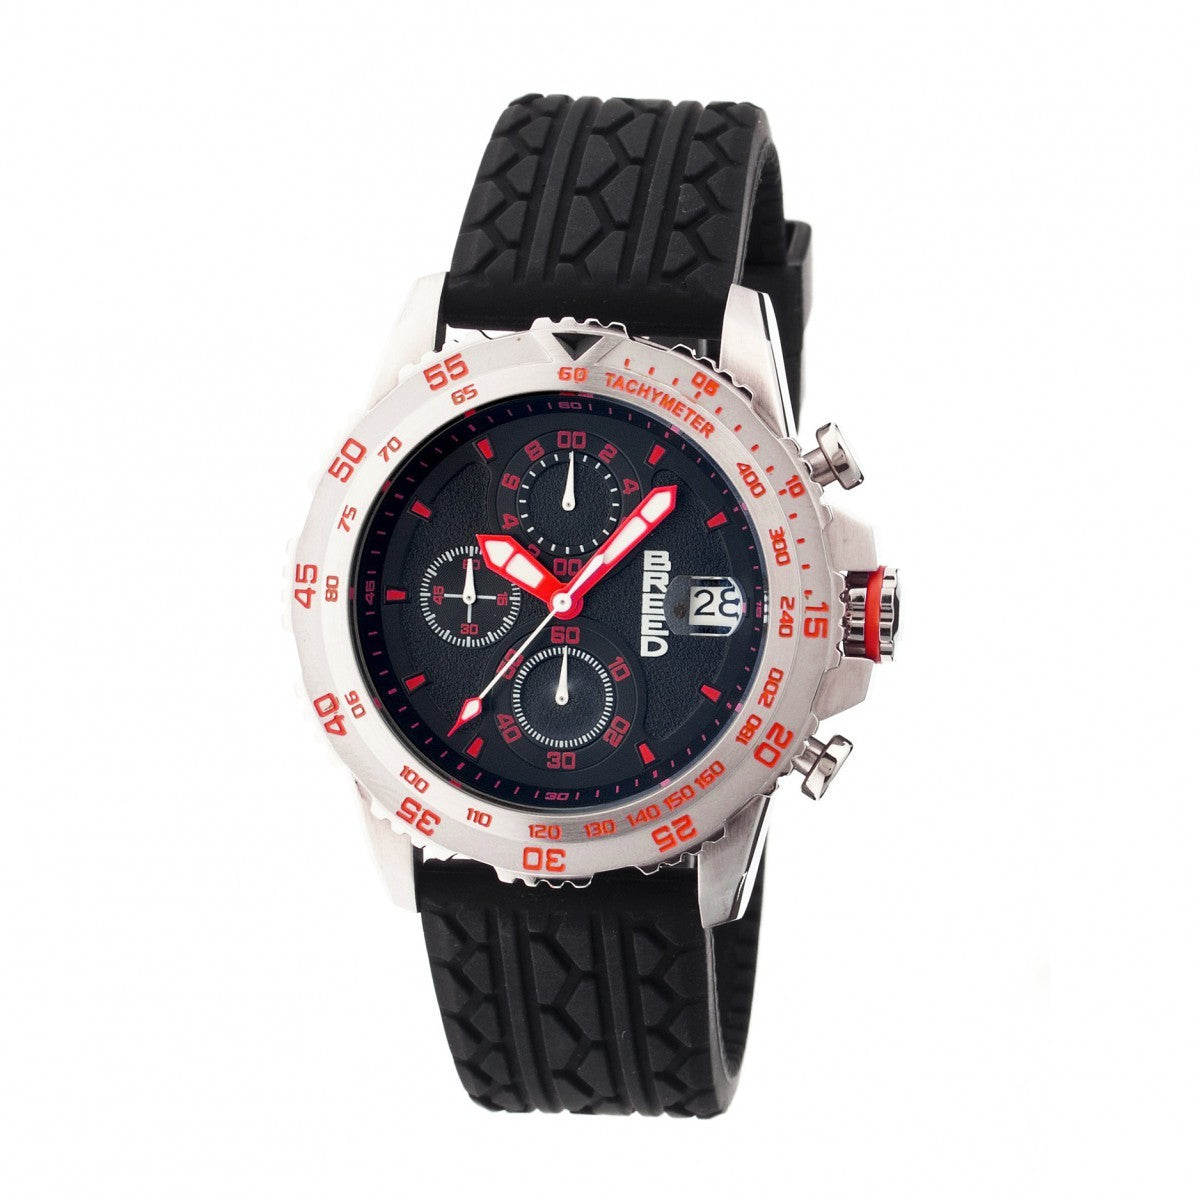 Breed Socrates Chronograph Men's Watch w/ Date  -  Silver/Red - BRD6304